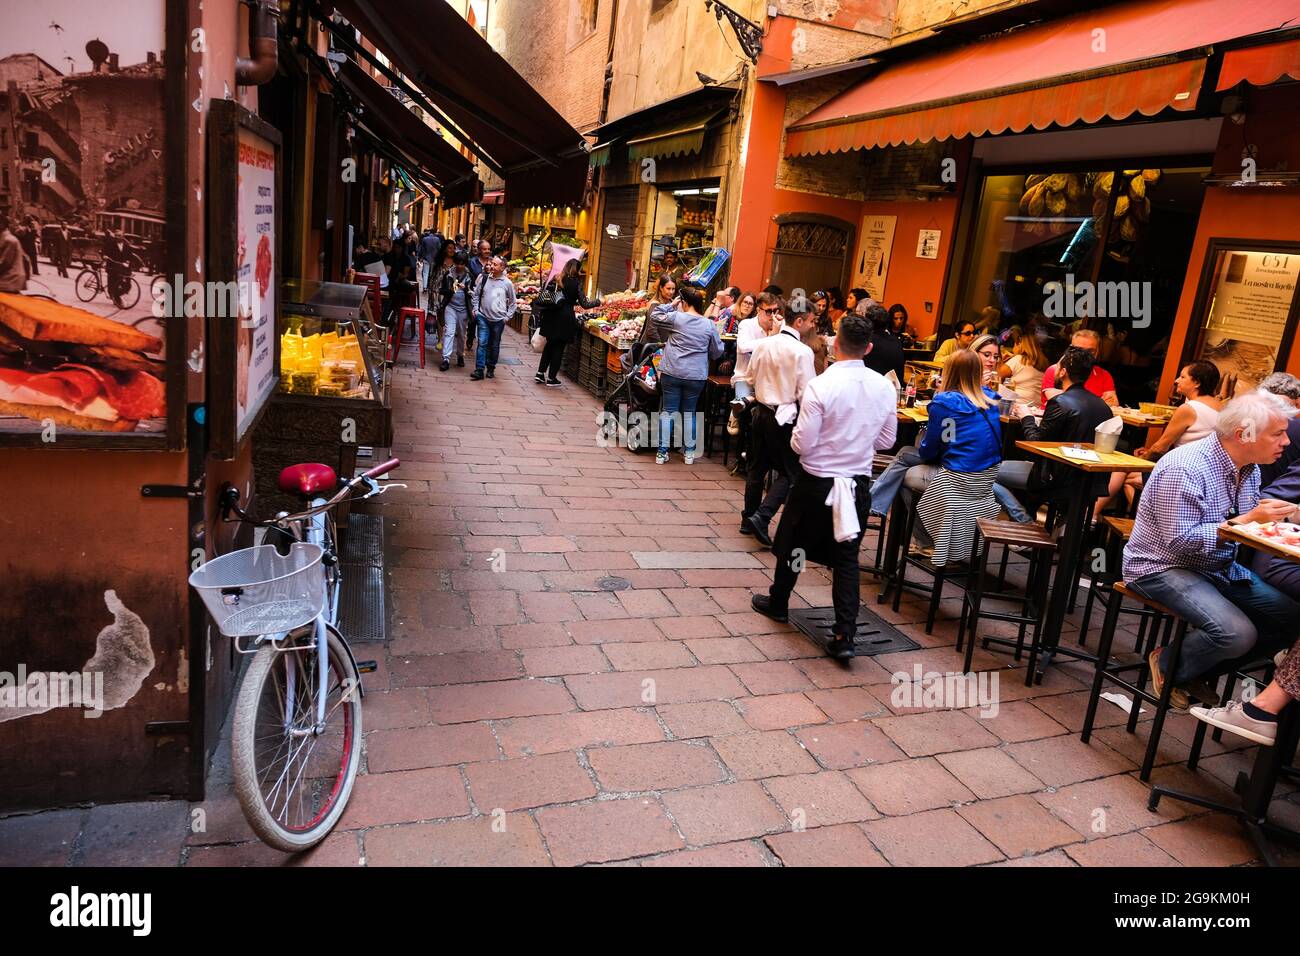 Diners enjoying the food and ambience in the Quadrilatero area of Bologna Italy Stock Photo